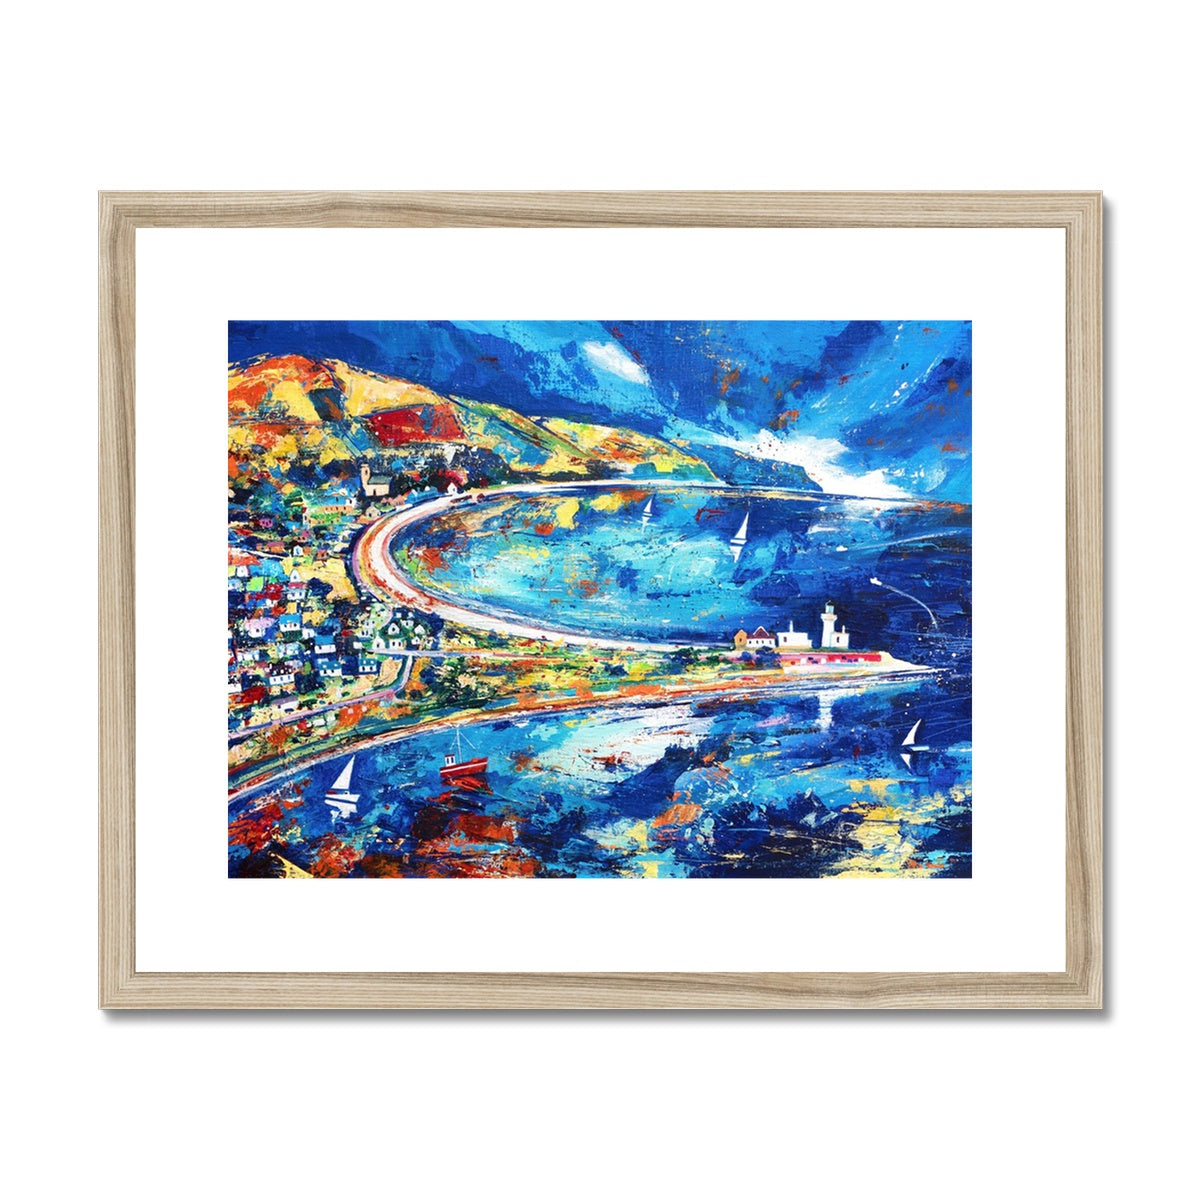 Chanonry Point to Rosemarkie, Black Isle Framed & Mounted Print